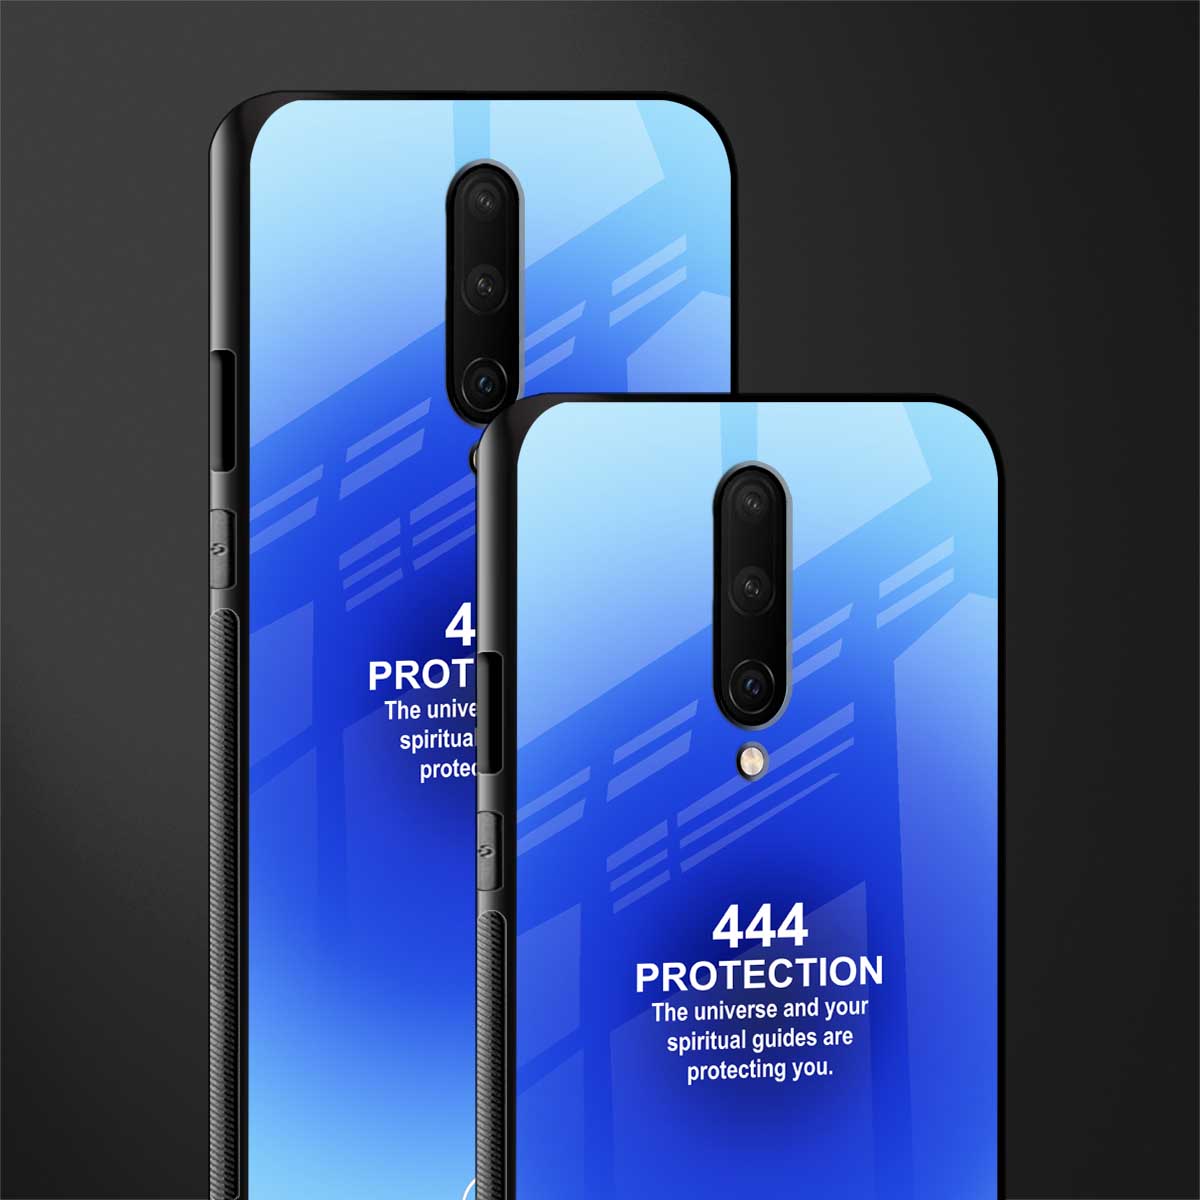 444 protection glass case for oneplus 7 pro image-2